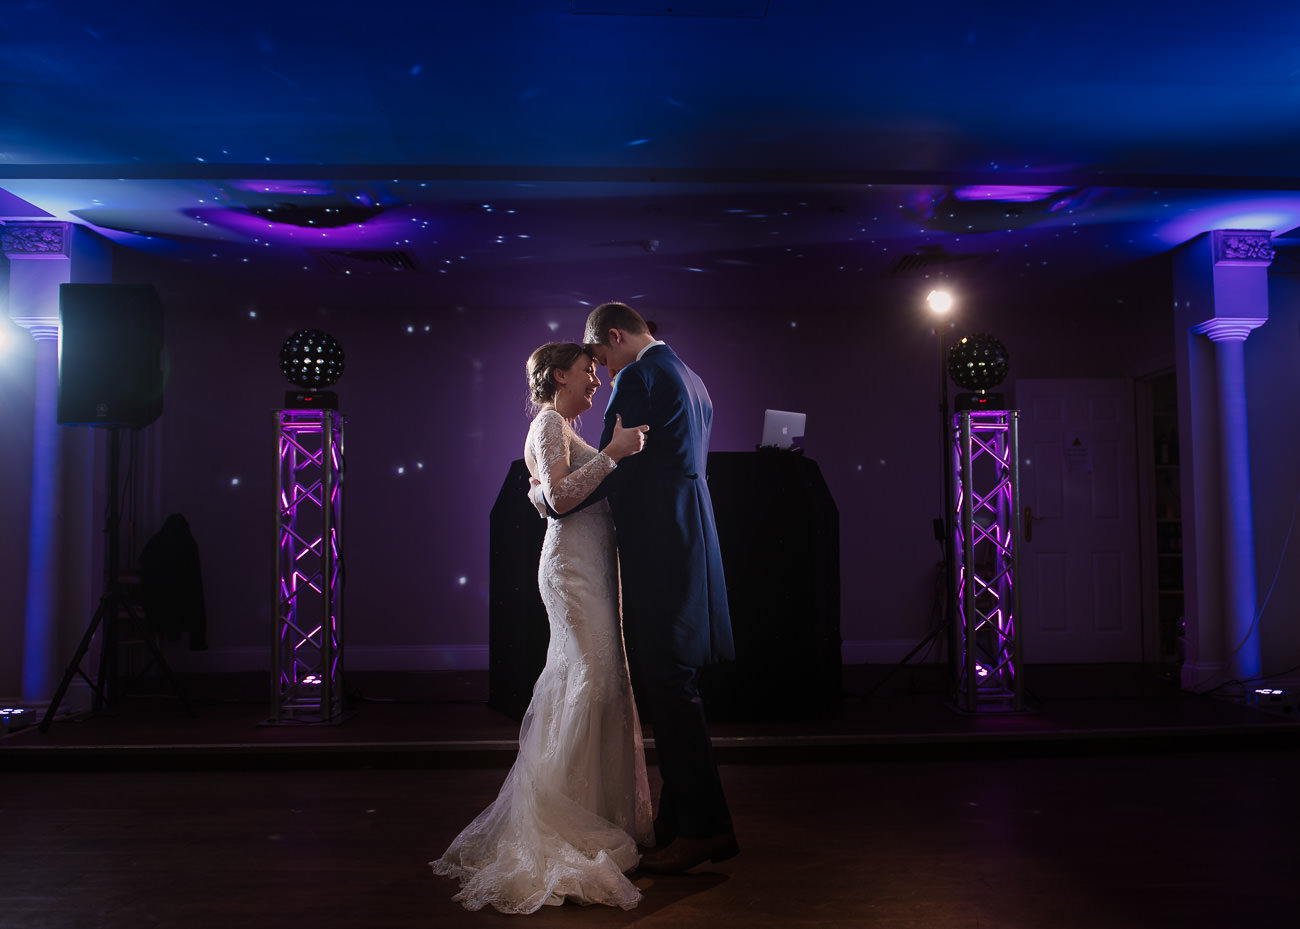 First dance wedding photography at Froyle Park